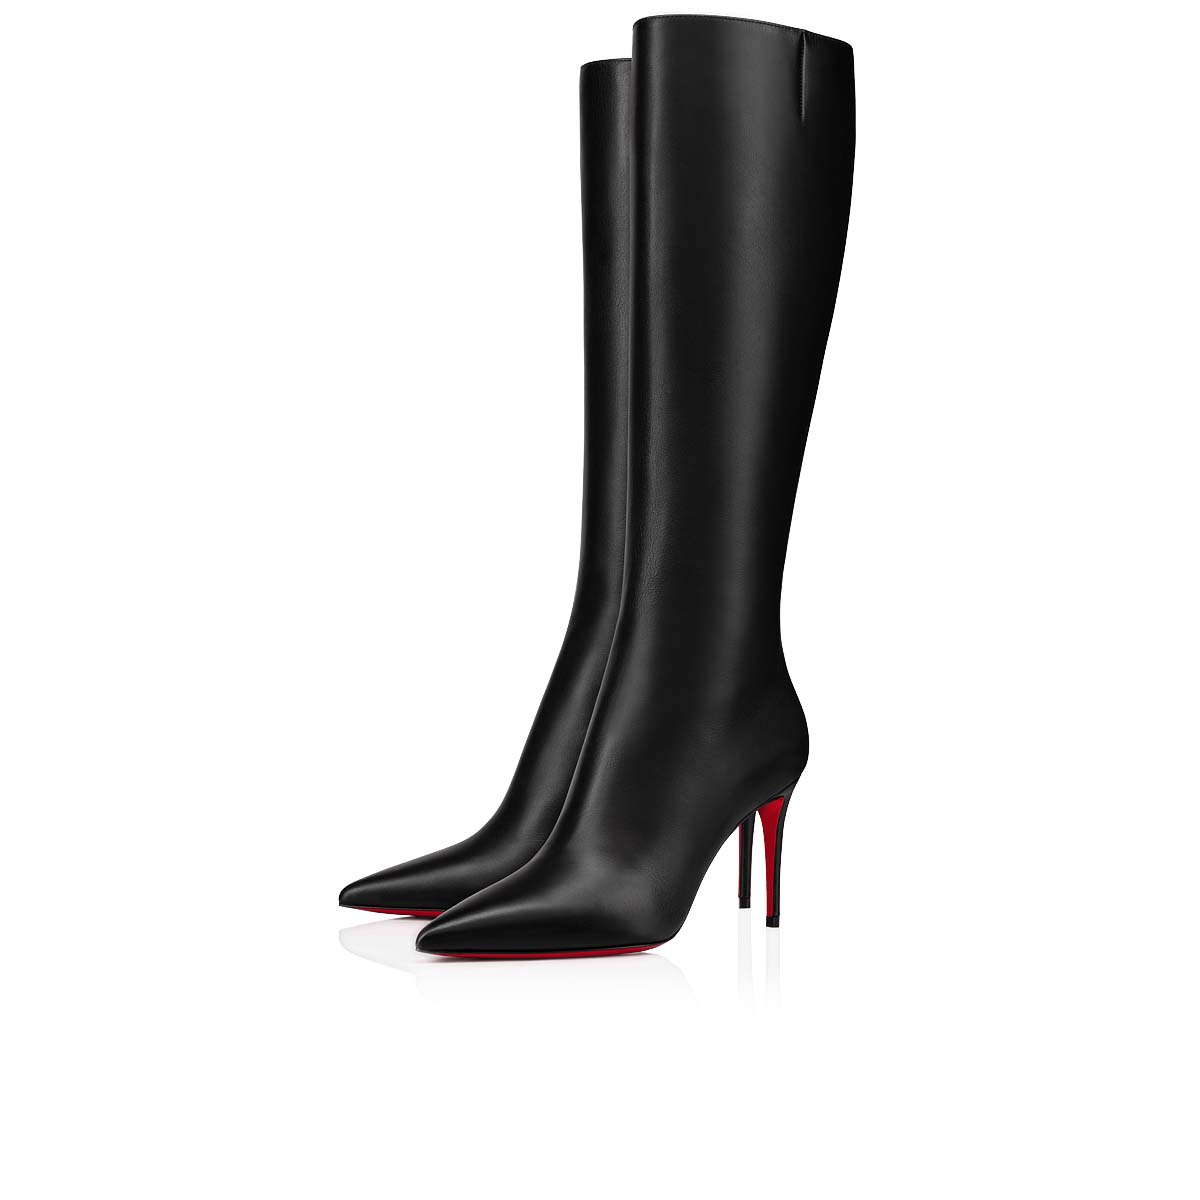 Cate boots Christian Louboutin Black size 36 EU in Suede - 32382308